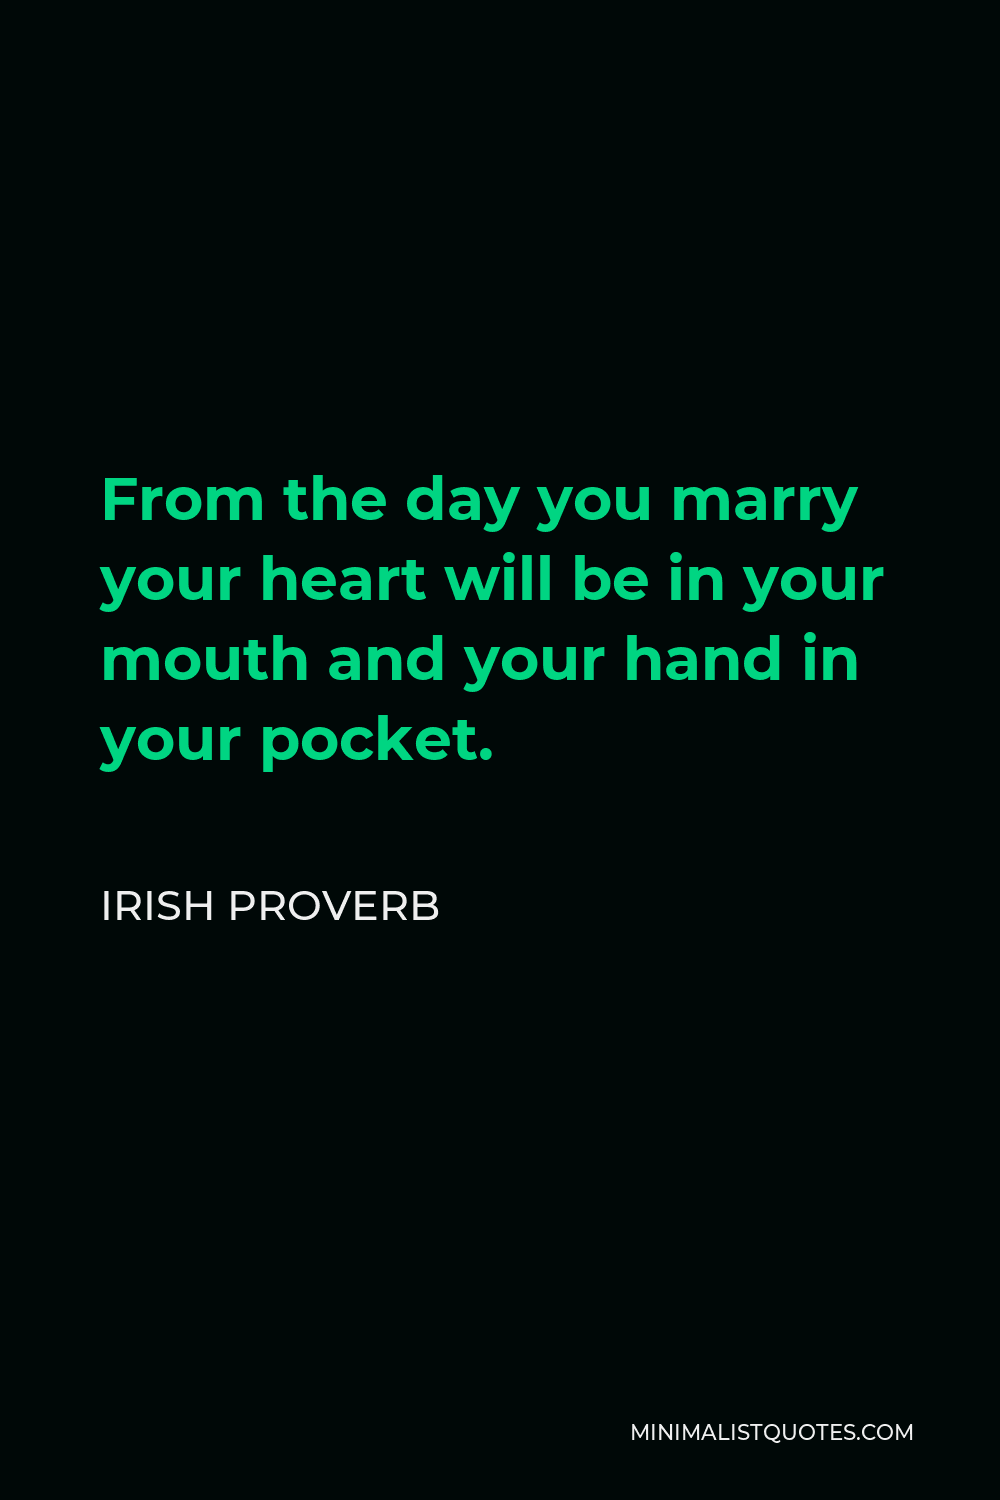 Irish Proverb Quote - From the day you marry your heart will be in your mouth and your hand in your pocket.